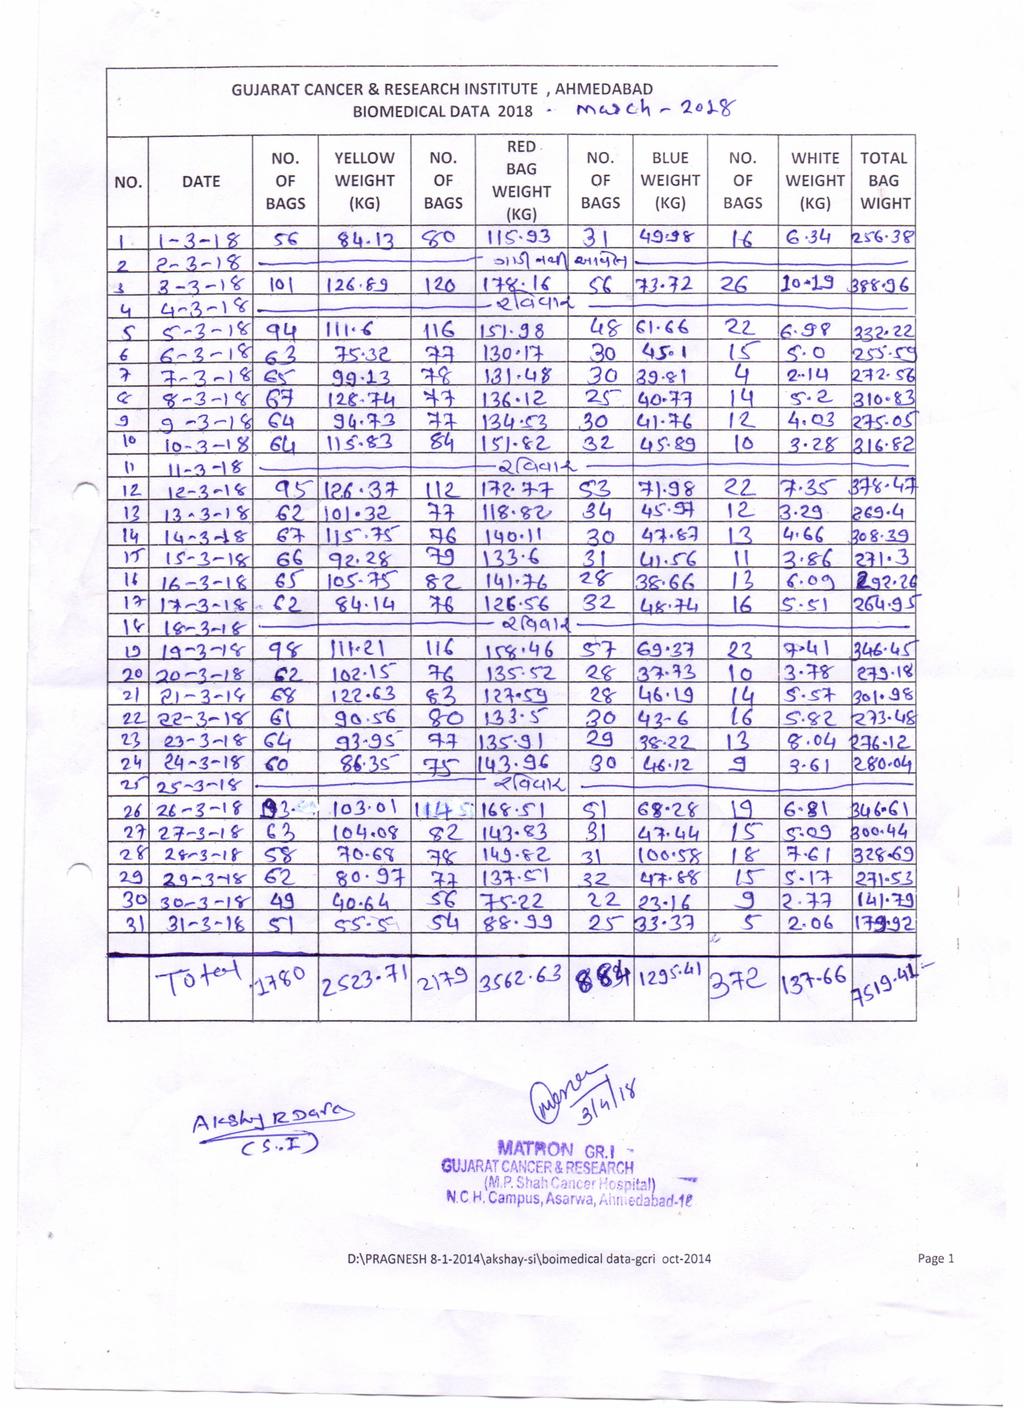 GUJARAT CANCER & RESEARCH NSTTUTE AHMEDABAD BOMEDCAL DATA 2018' 0 Ll,,...'211l-%" DATE YELLOW. BLUE WHTE TOTAL WGHT -t. 10 4. Qj.os \ 16 21.. '0 6,'2, is" d AT ON GR.